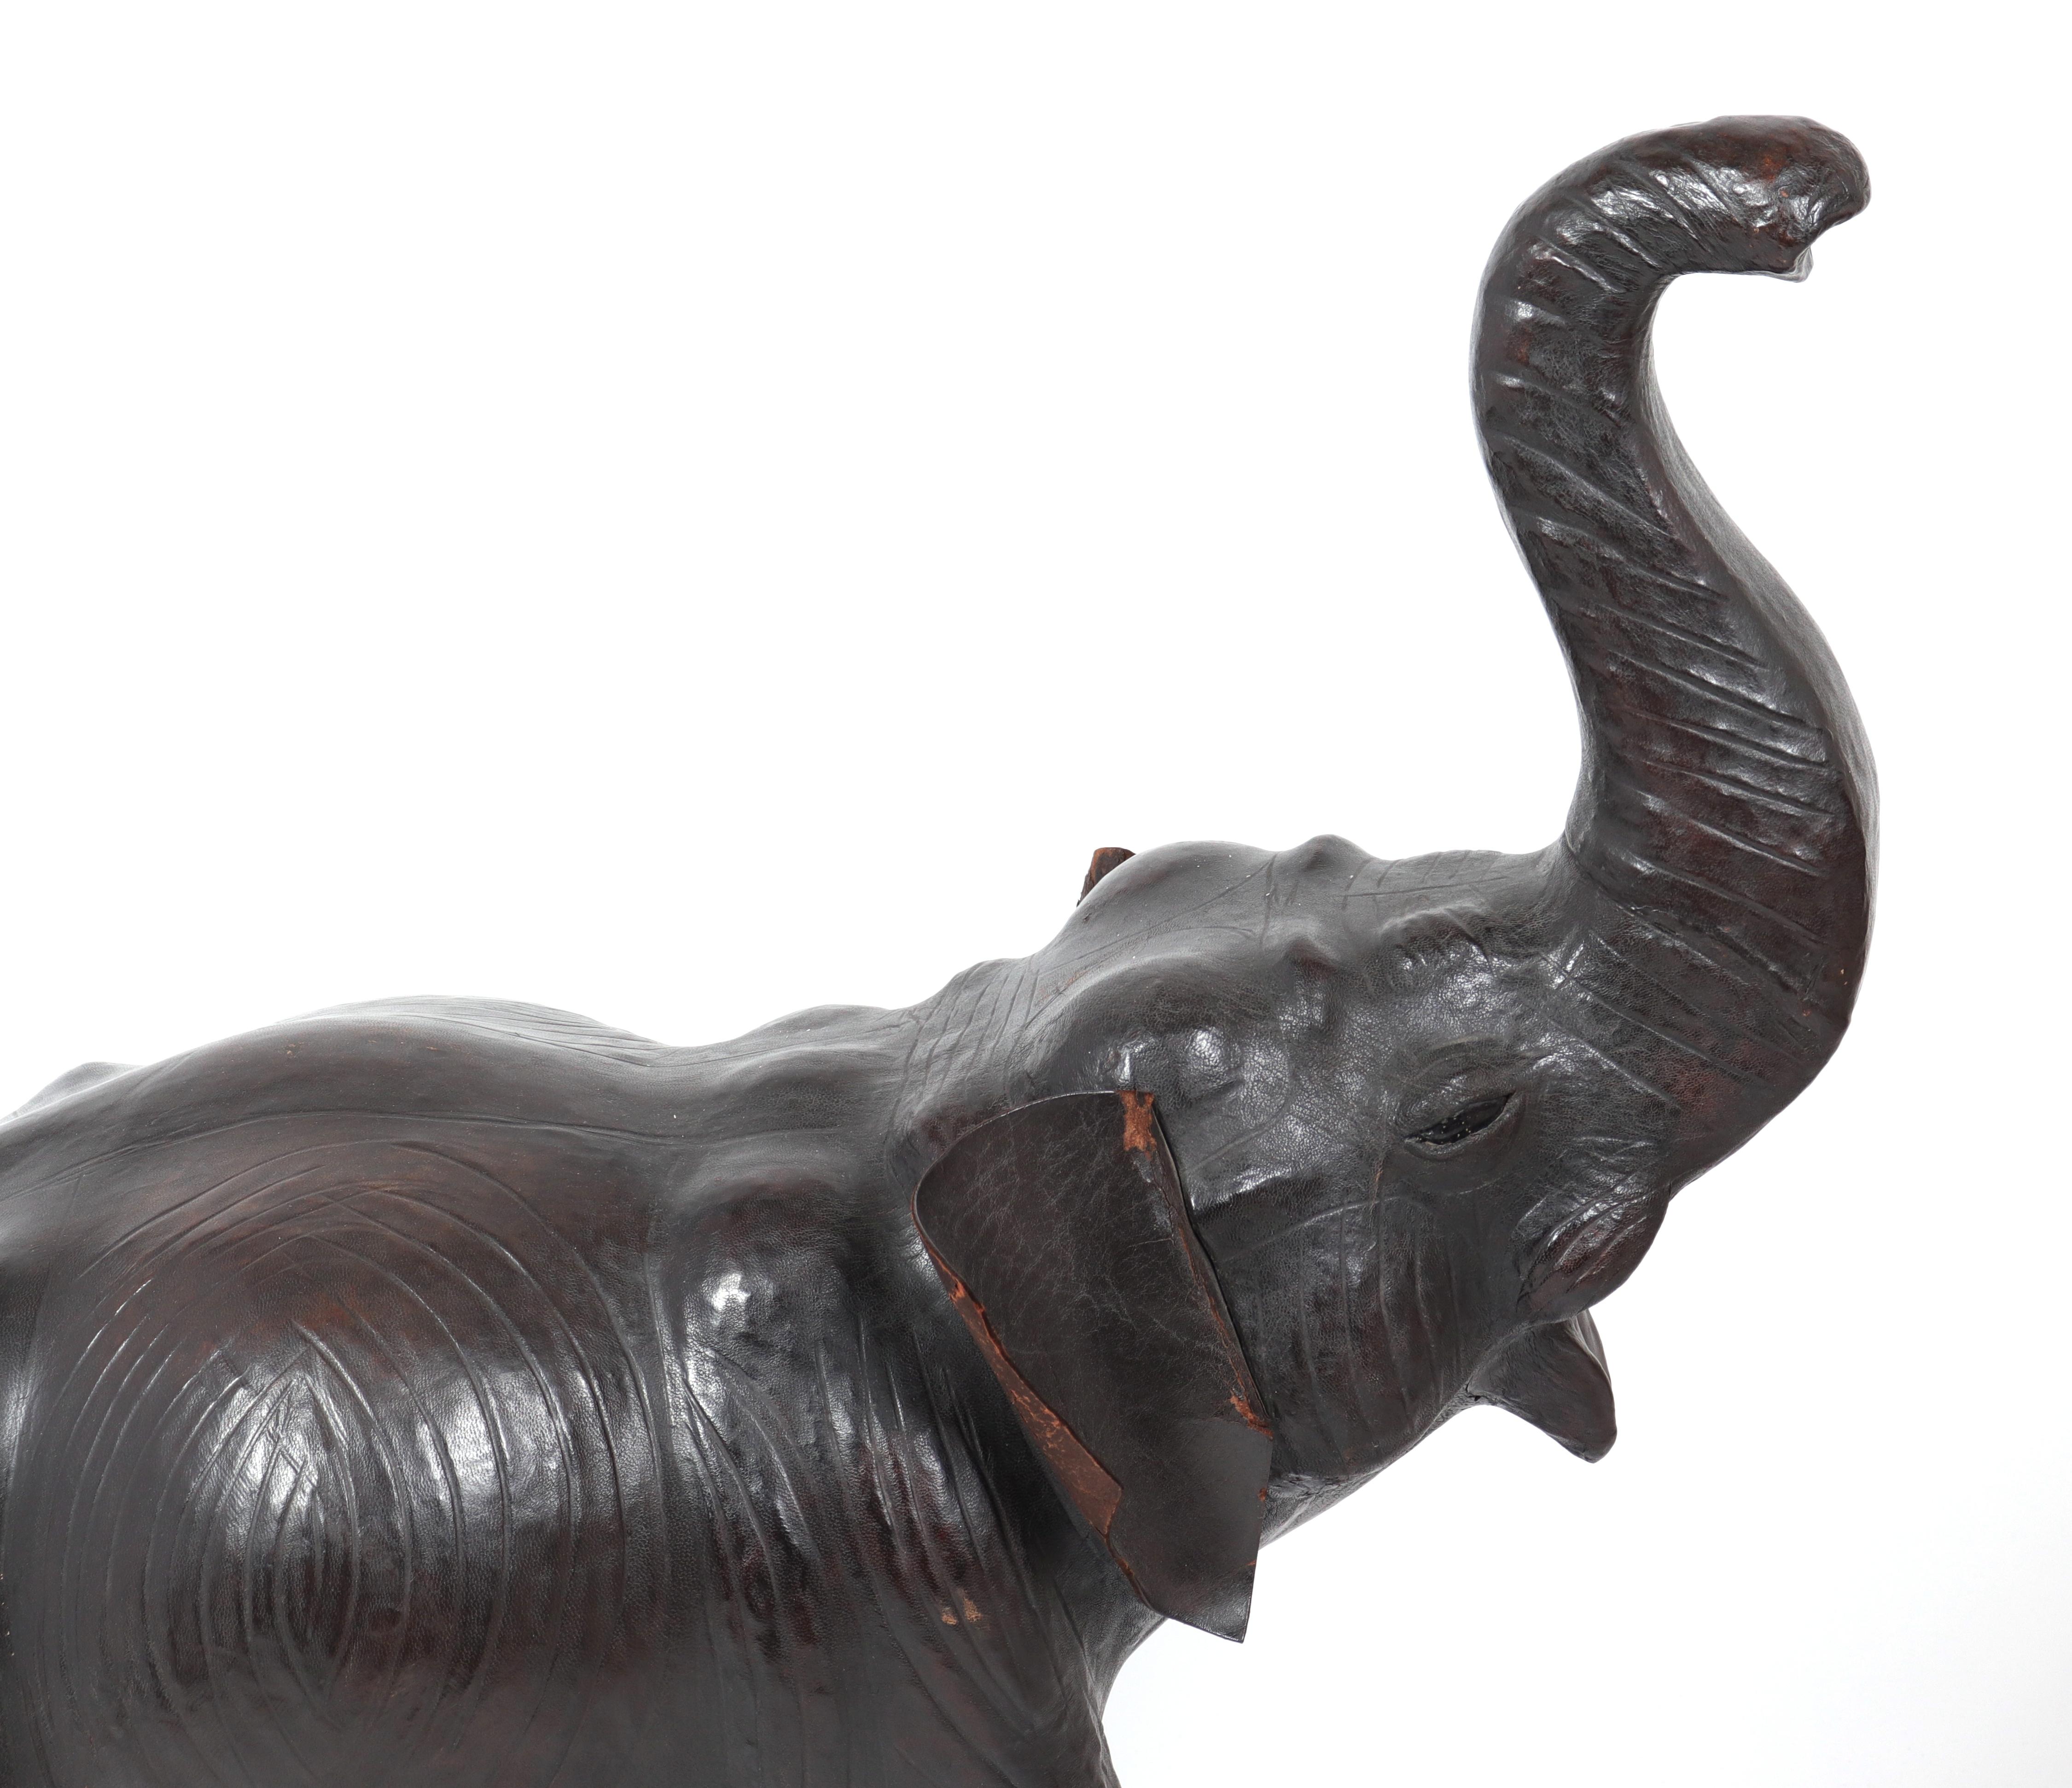 20th Century Modern Large Leather-Clad Elephant Sculpture